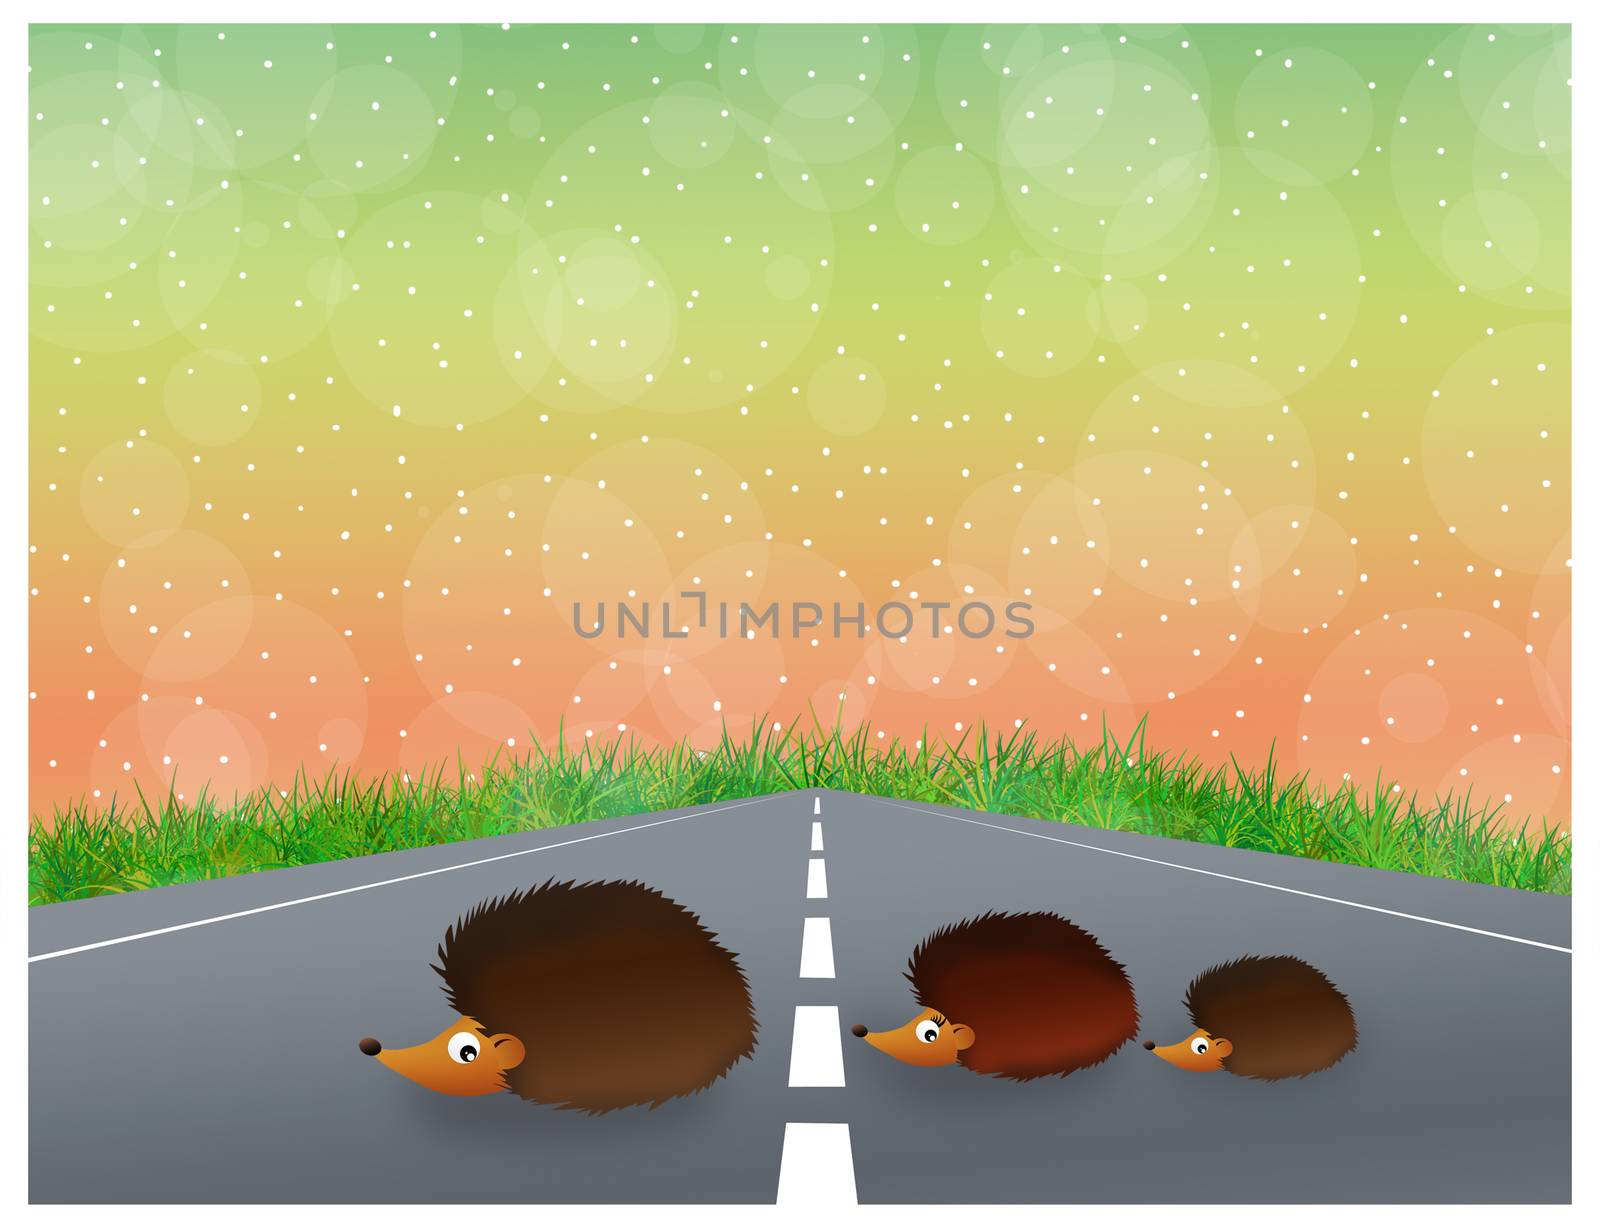 hedgehogs family by adrenalina